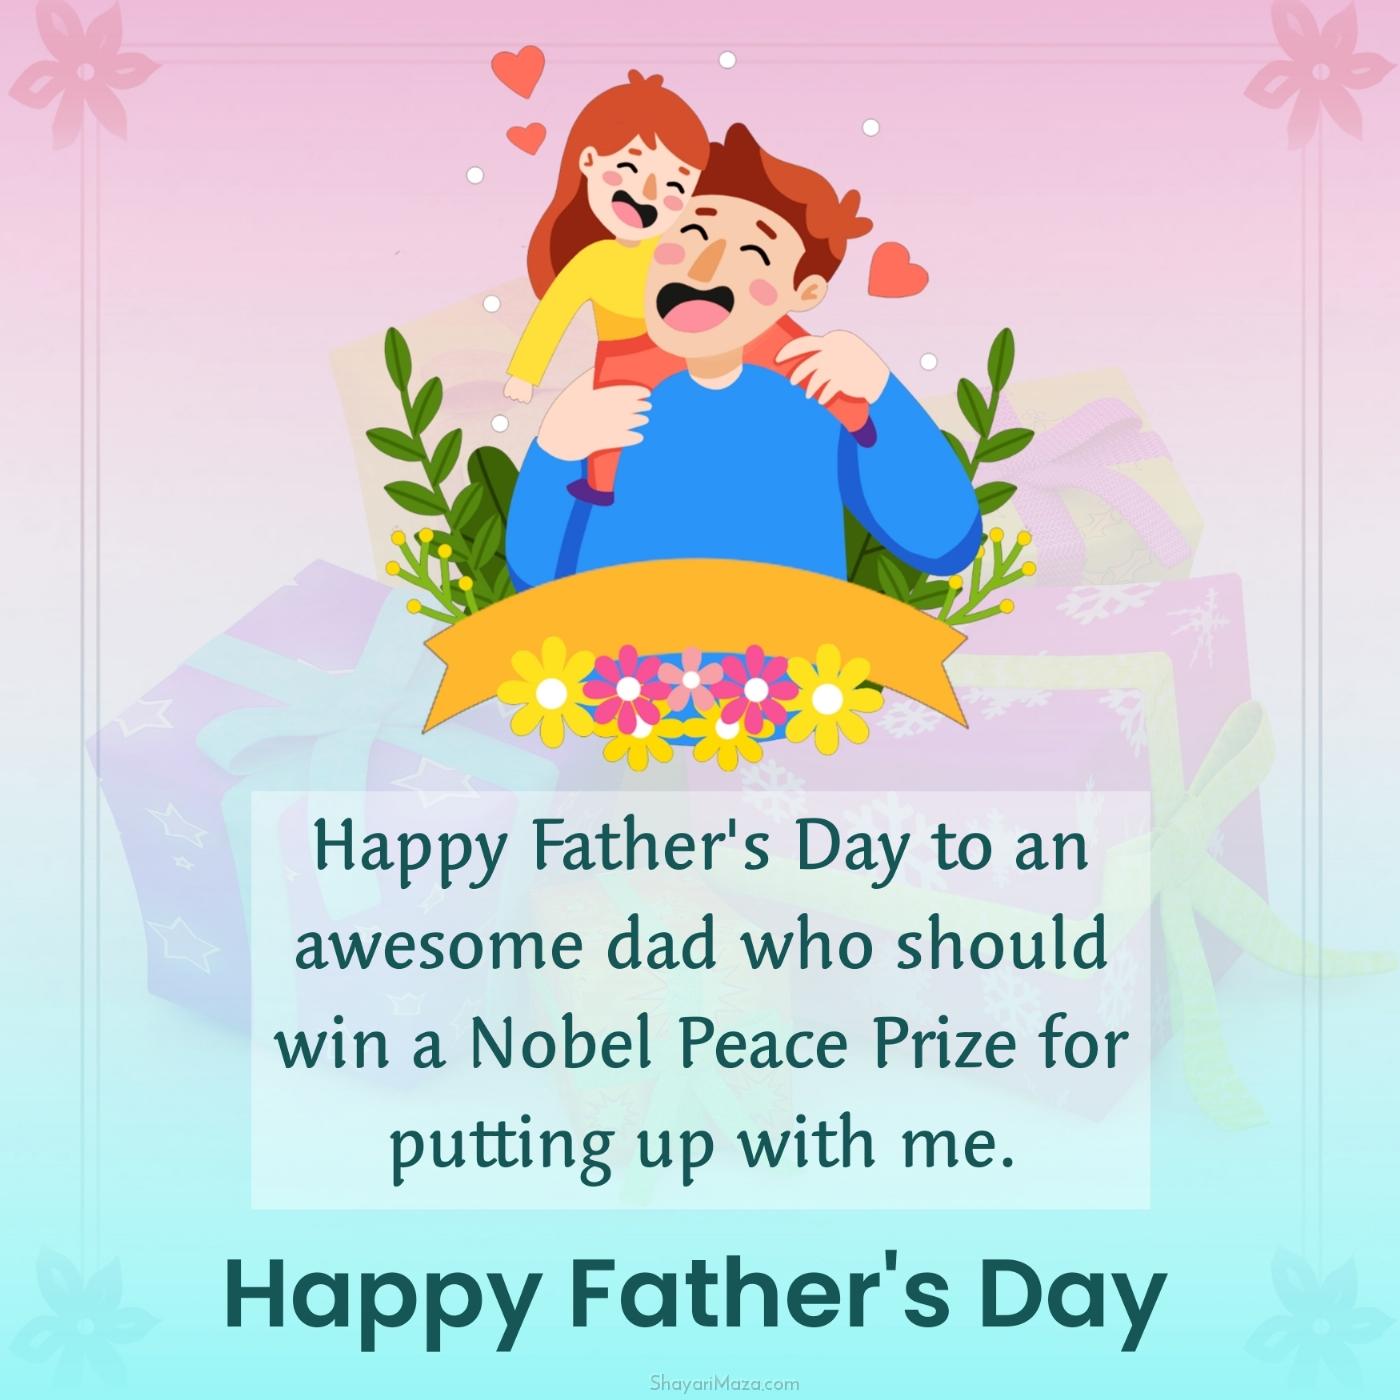 Happy Father's Day to an awesome dad who should win a Nobel